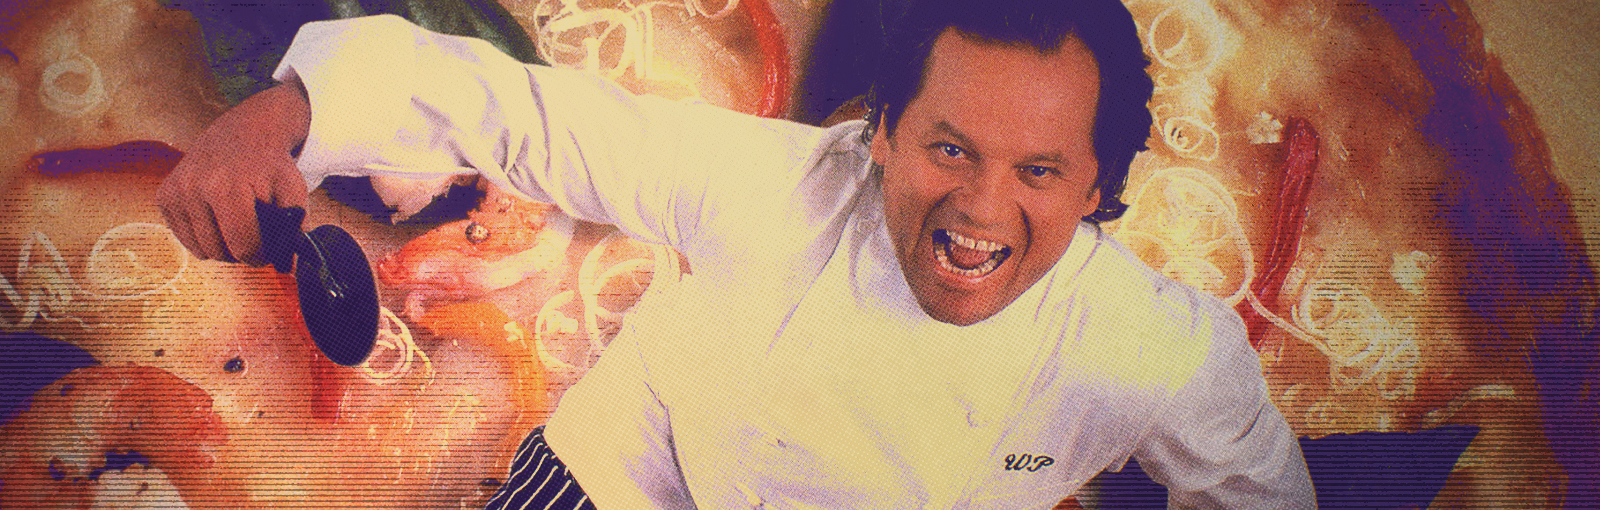 Wolfgang Puck in the 80s